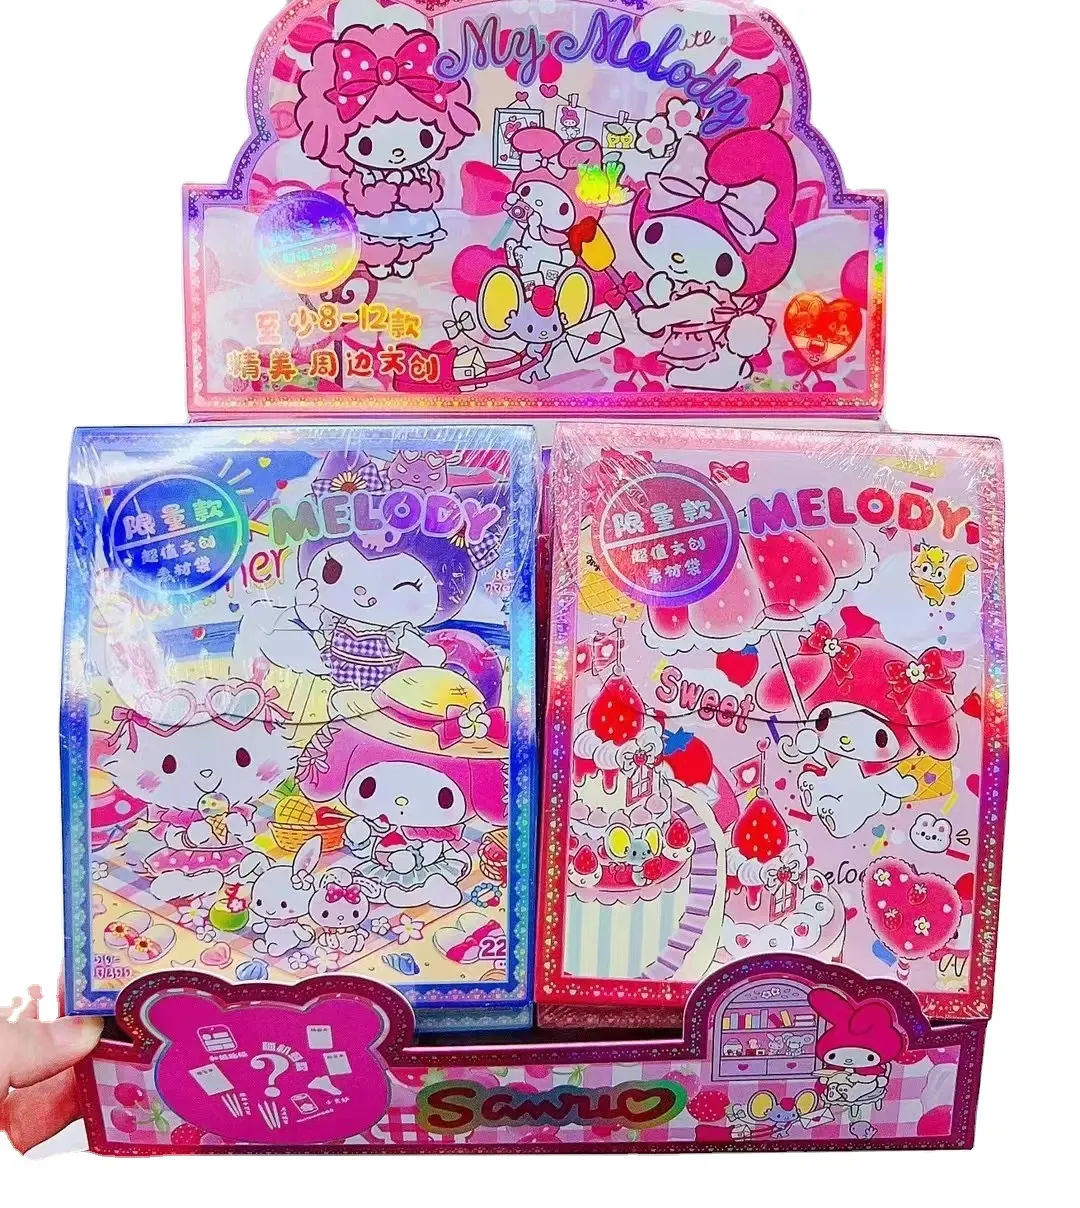 DHFKumilo kuromi Blind Bag Lucky Surprise Blind Box sanrioed Stationery Set Student points gift prizes